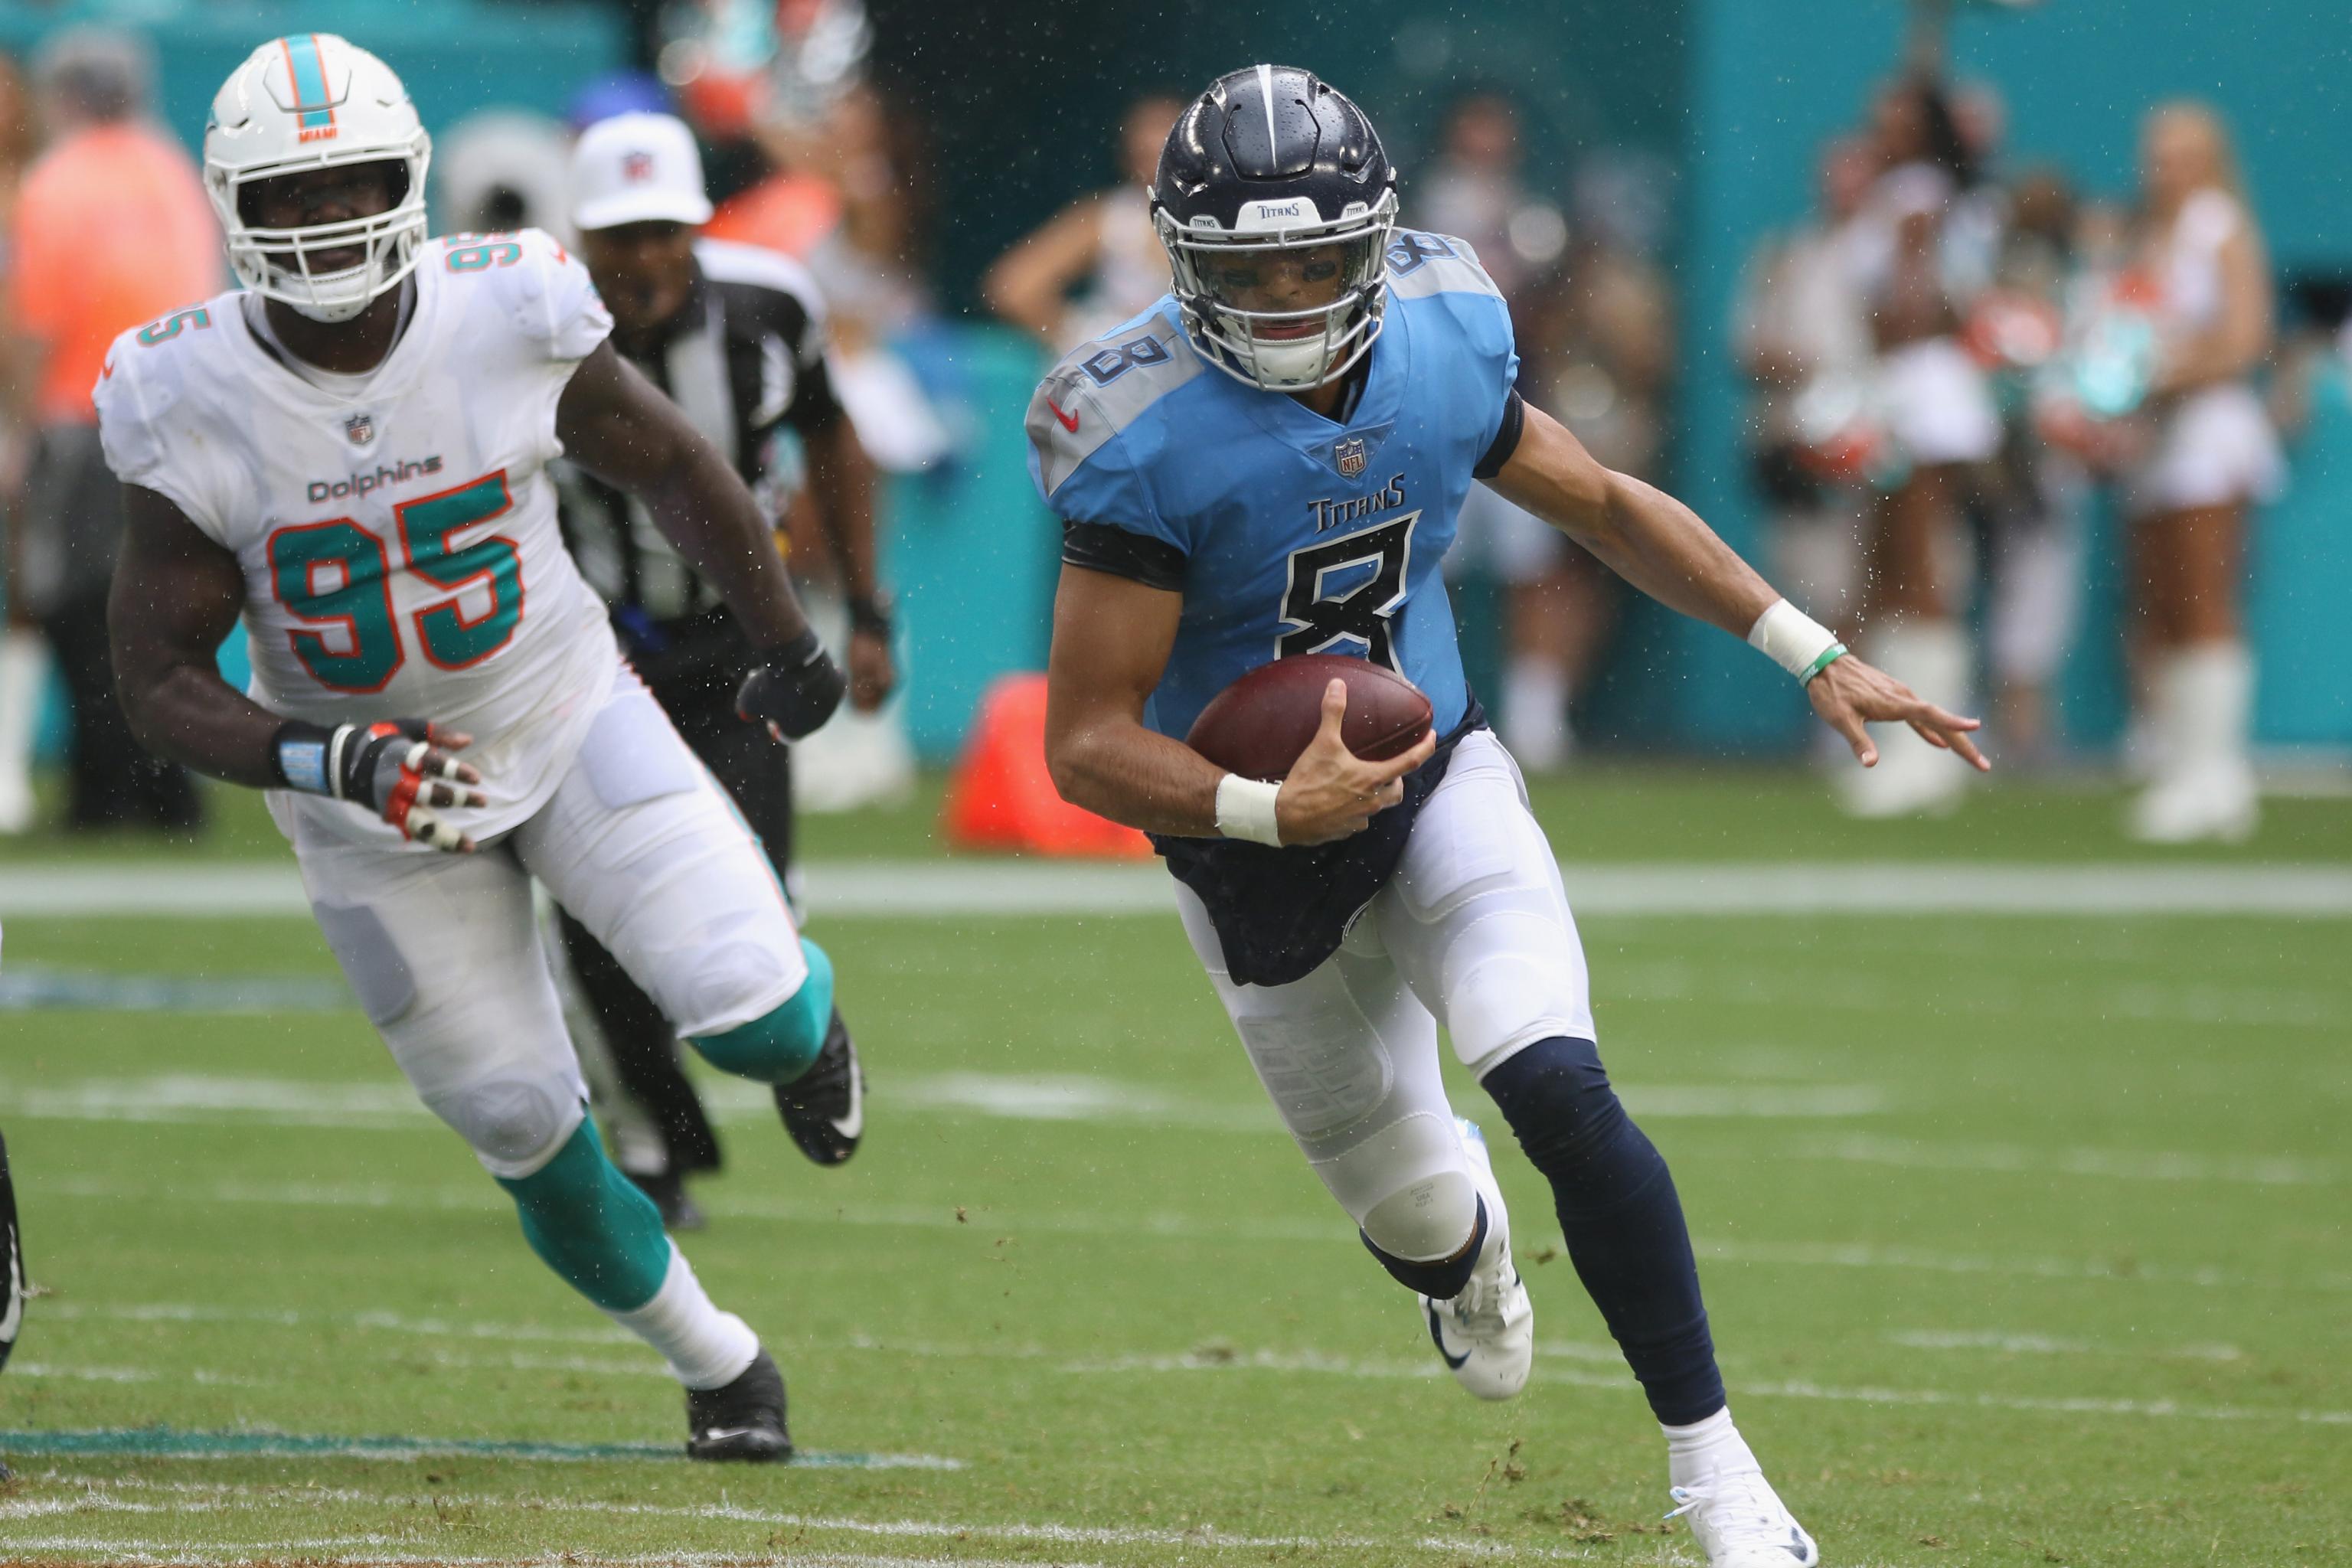 miami dolphins at tennessee titans